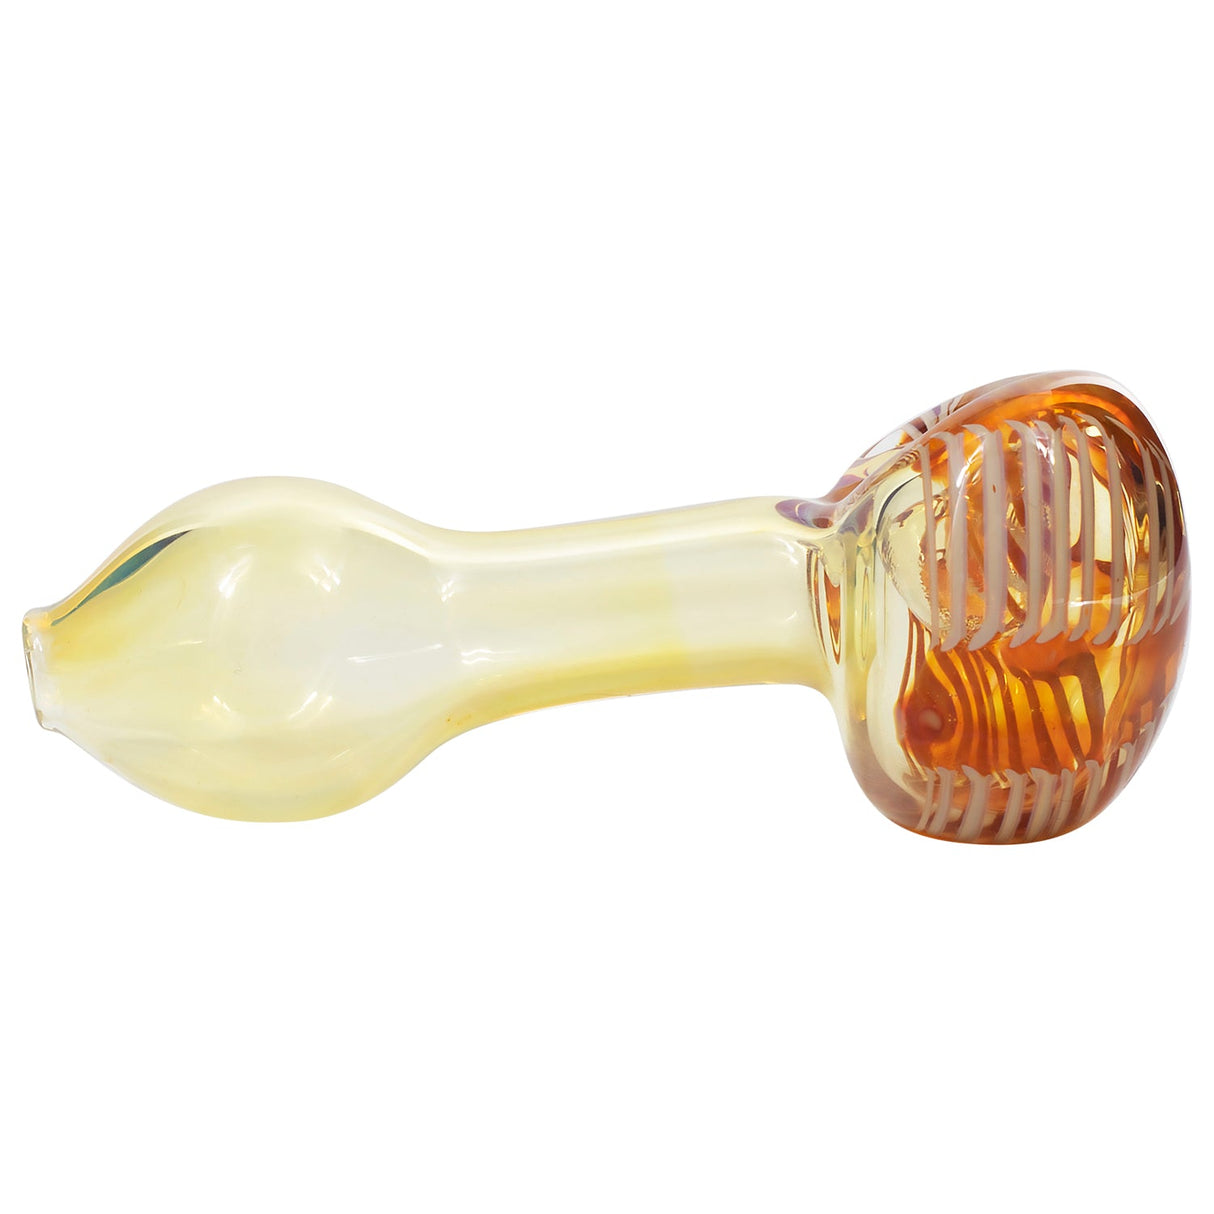 LA Pipes Color Cake Swirl Glass Pipe, 3.5" Spoon Design, for Dry Herbs, Side View